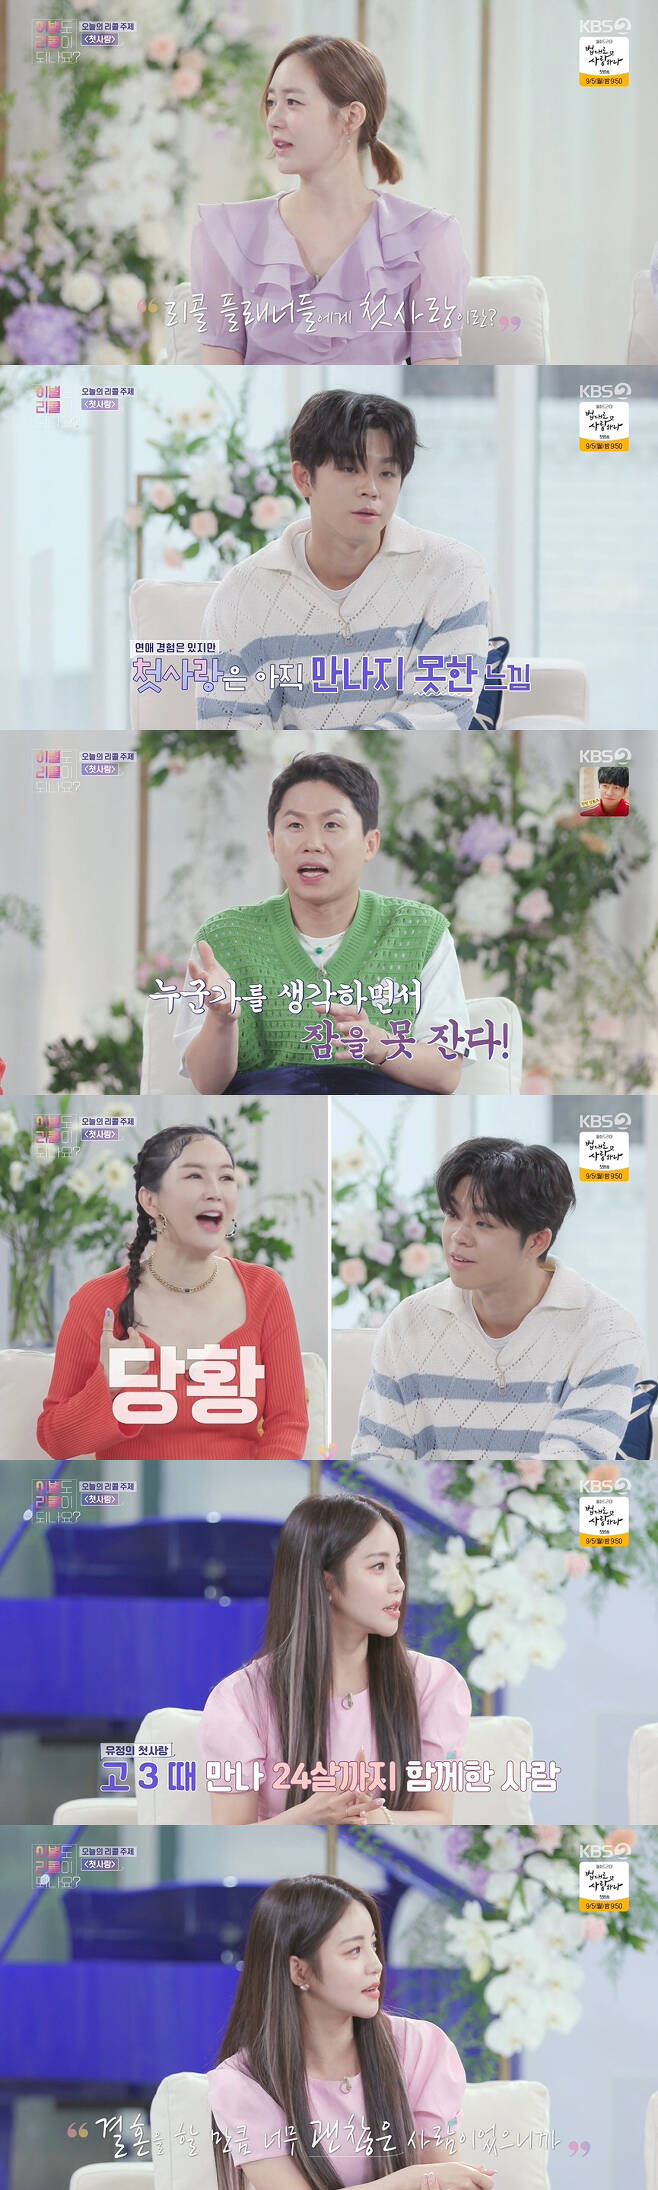 Sung Yu-ri has been honest about his past love experience.KBS Does the breakup also be recalled? on the 22nd?In , the story of Crédit Agricole, who breaks up with First Love, was drawn.On the day, Sung Yu-ri asked Crédit Agricole planners, What Memory does First Love remain?I have a love that I have done so far, but I do not want to do my first love yet?Yang Se-hyeong said, There are many people who do not know what First Love is like that. The standard of First Love I think is that it is First Love that I can not sleep while thinking about someone and keep thinking about him.I have never liked anyone that much, he said. The more I do, the more I learn.Jang Youngran boasted that my husband is my first love.However, he threw a stone fastball saying, I do not think so, and soon he laughed, I have come out of my heart.Brave Girls Yu-Jeong, who starred as a daily Crédit Agricole Planner, said, My first love is a person I am curious about.When I suddenly think about it, I think I want to be good. I met him at the age of 24 when I was in high school, and I met him again and again, he said.I felt good when I heard about marriage. Someone too good to do marriage. (Love) seems to be the timing.If I had met now, I would have looked back and marriage with him. I was too young at that time. Meanwhile, the Crédit Agricole Planners listened to Xs love story, which was devoted to Crédit Agricole, and told their own love experiences.I had a person who met for about two years, but when I met him, I always went an hour earlier than the appointment time. I wanted to see him soon.Sung Yu-ri said: Ive sold luxury watches.I want to give my boyfriend something Gift (when I was in Fin.K.L activity), but my mother took my income, so I did not have any money. So I wanted to give my boyfriend something Gift, so I got a memory that I sold my luxury watch at a low price and gave it to him.He said, Im sorry, honey. He laughed at the apology.On the other hand, Son Dong-woon said, I honestly started Idol Producer too early, I started Idol Producer in junior high school and I could not come all in like this.Yang Se-hyeong pointed out that the dragonworm is getting away again, and he said, I have been active since I was 8 years old.How long did you have time in junior high school? 